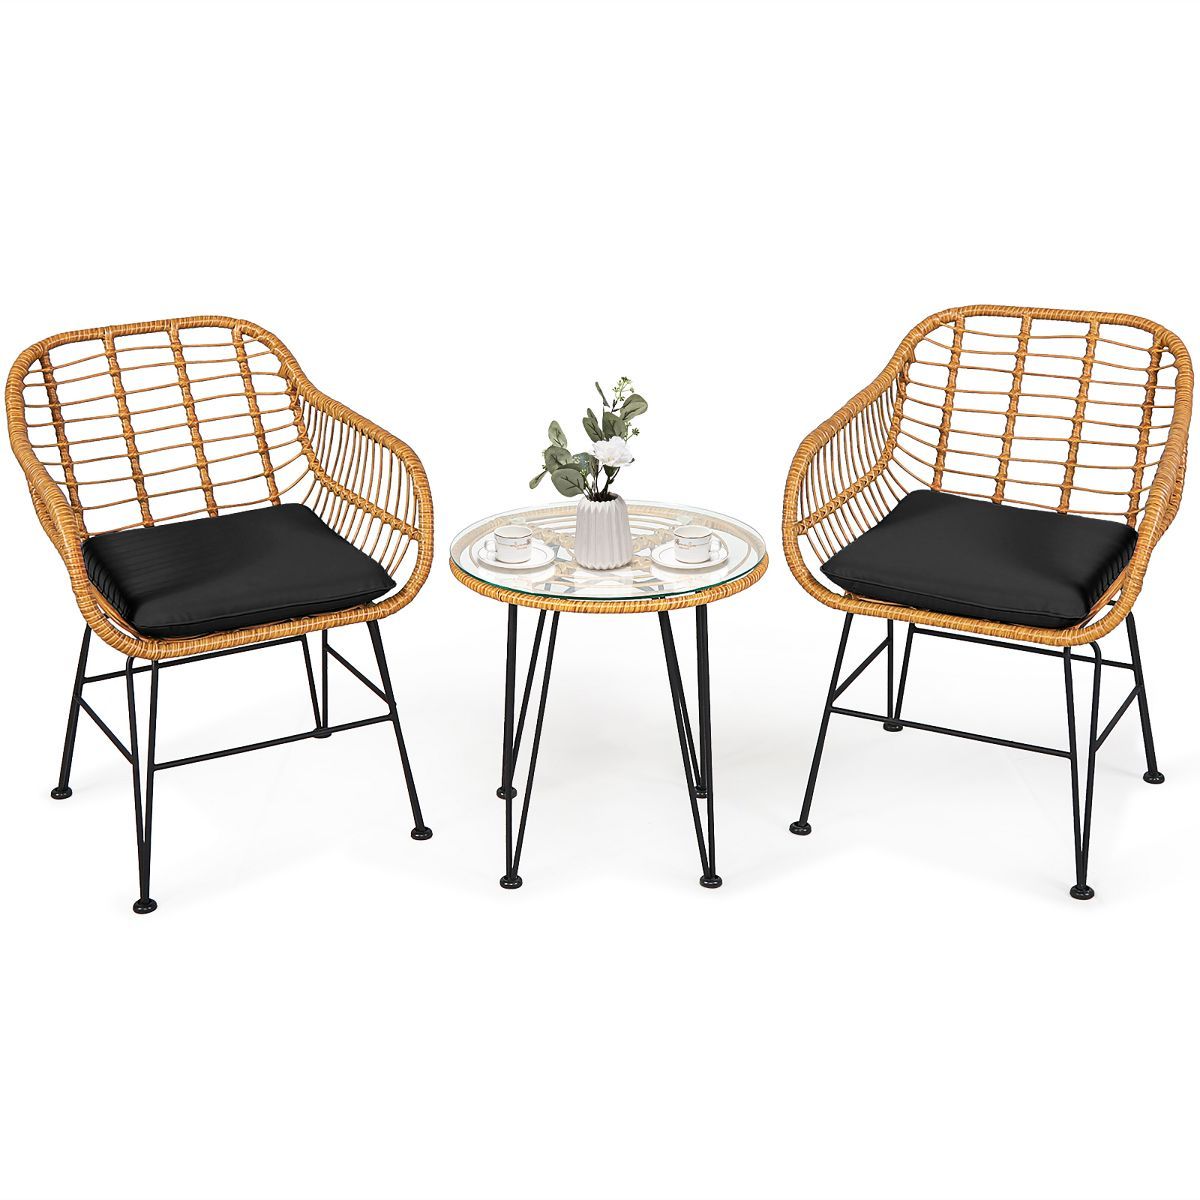 Costway 3PCS Patio Rattan Bistro Furniture Set Cushioned Chair Table | Target